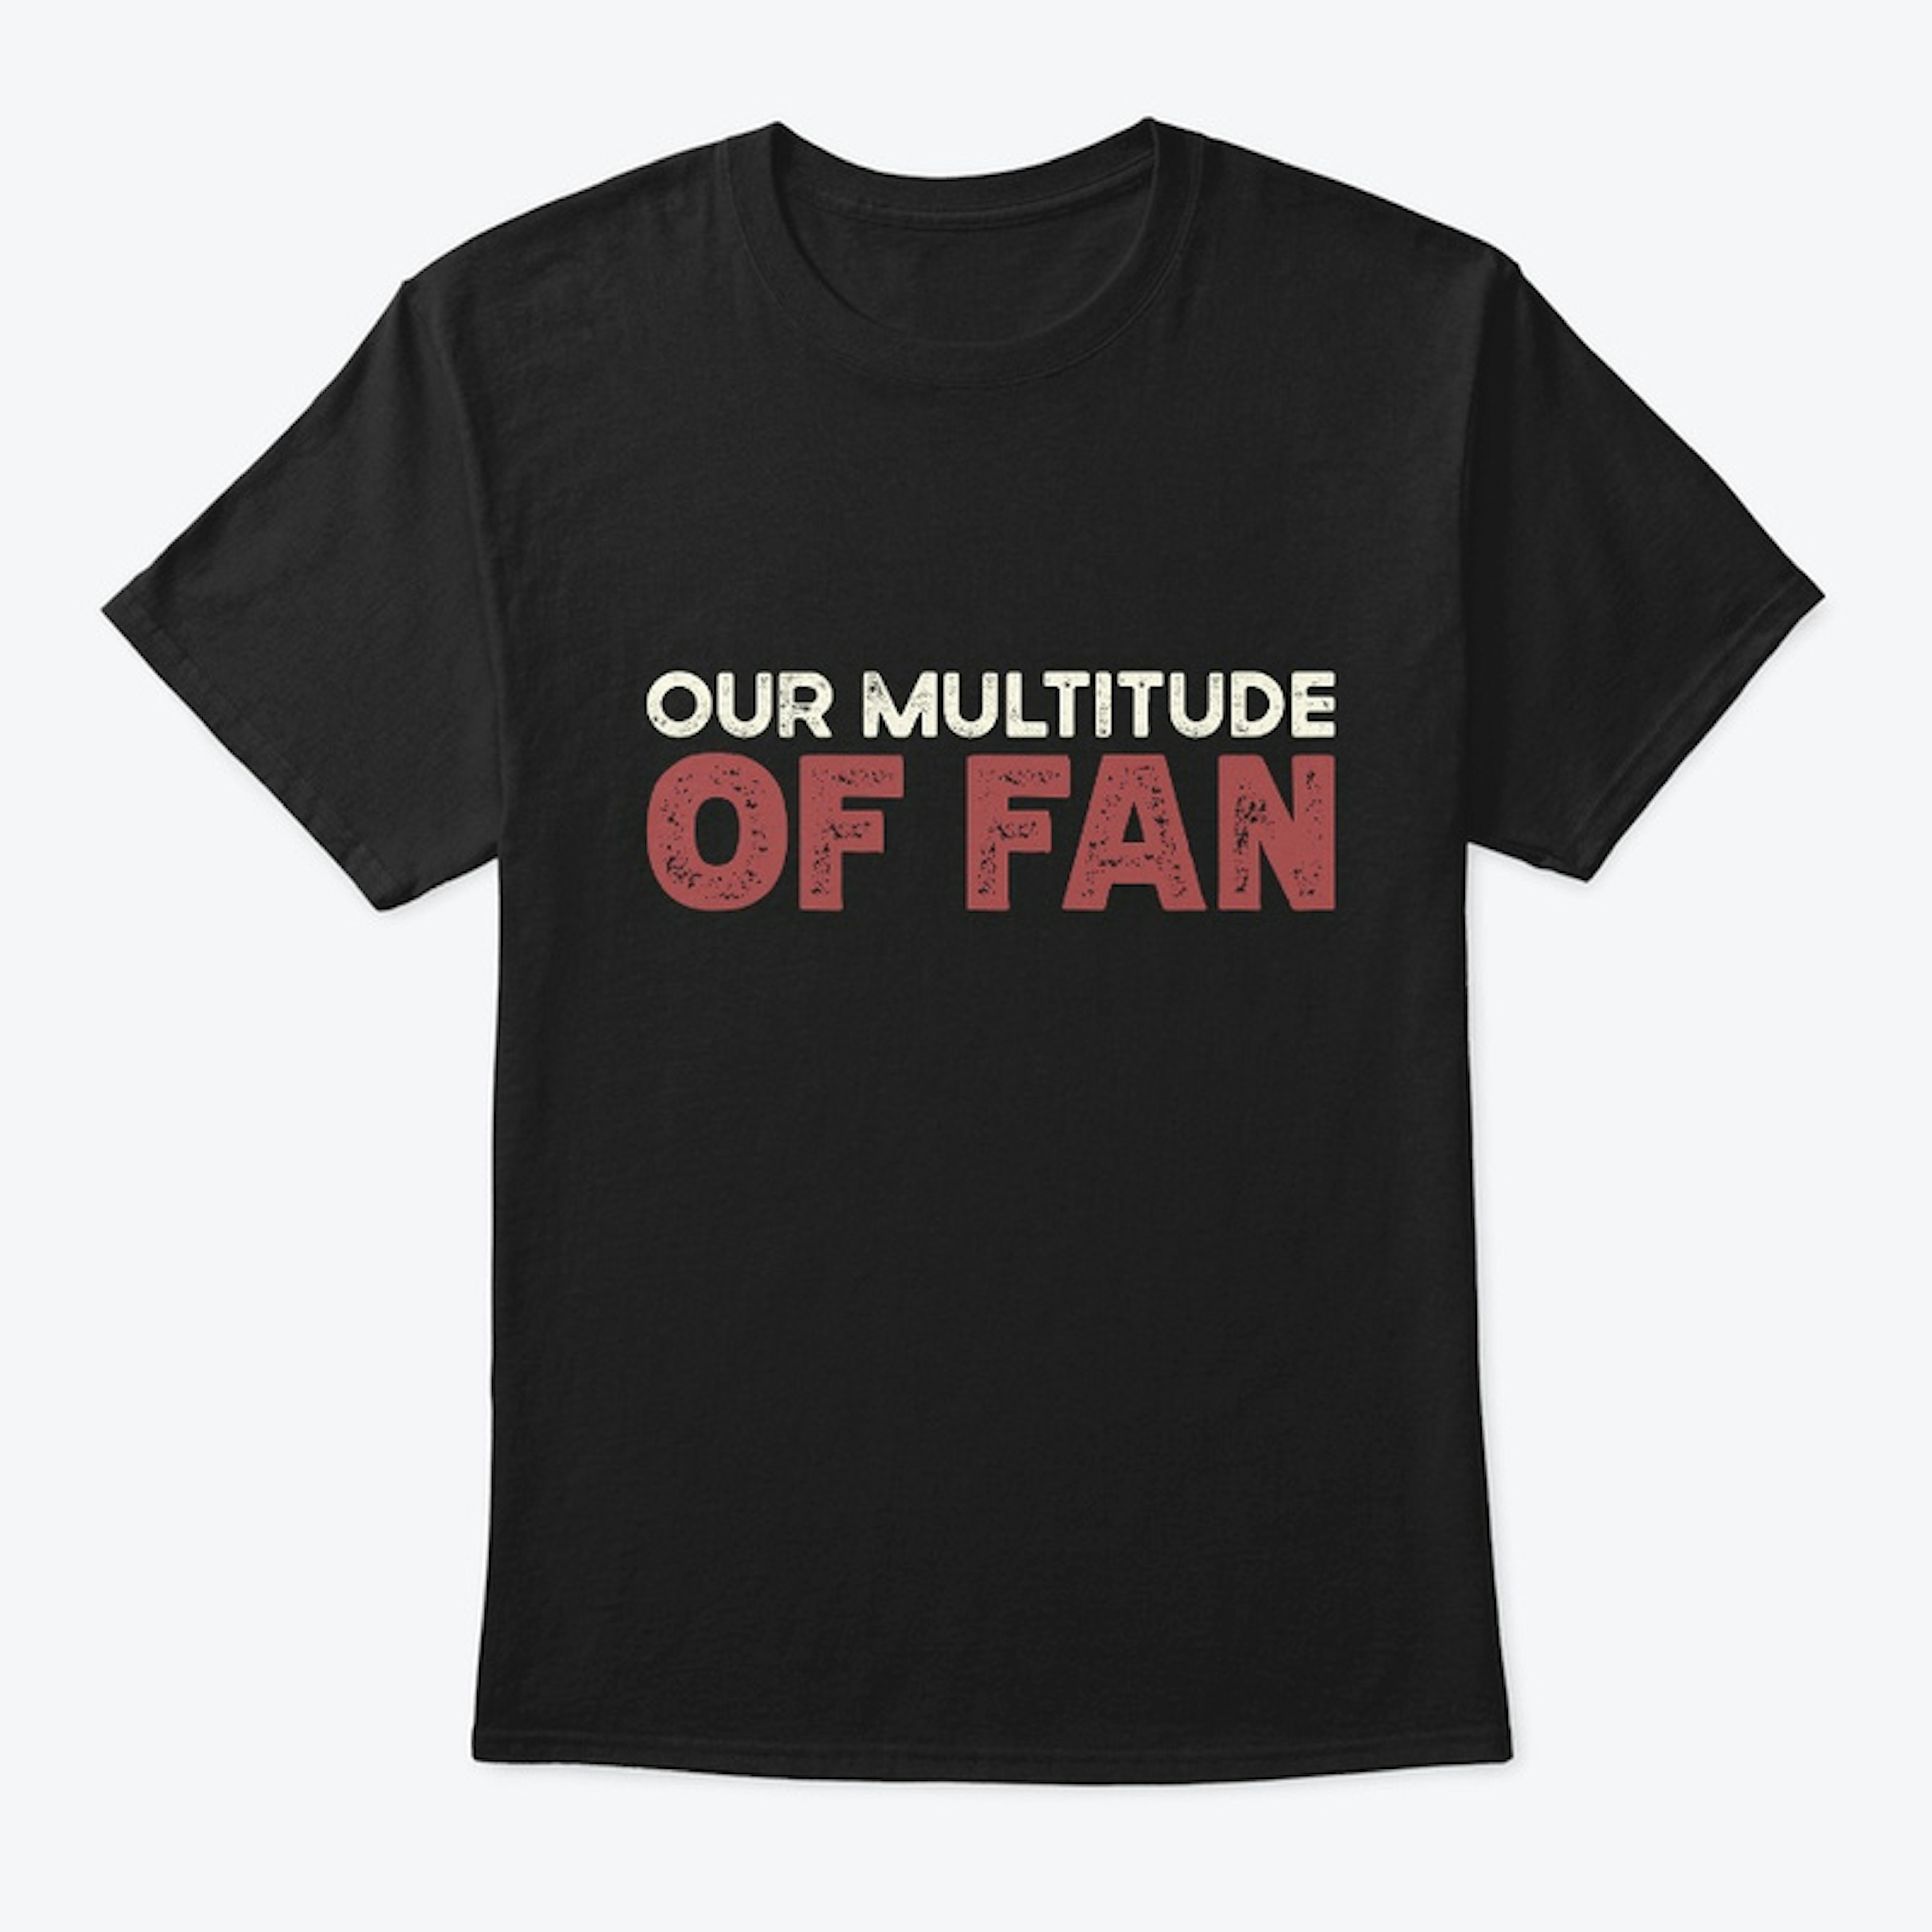 Our Multitude of Fan Collection!